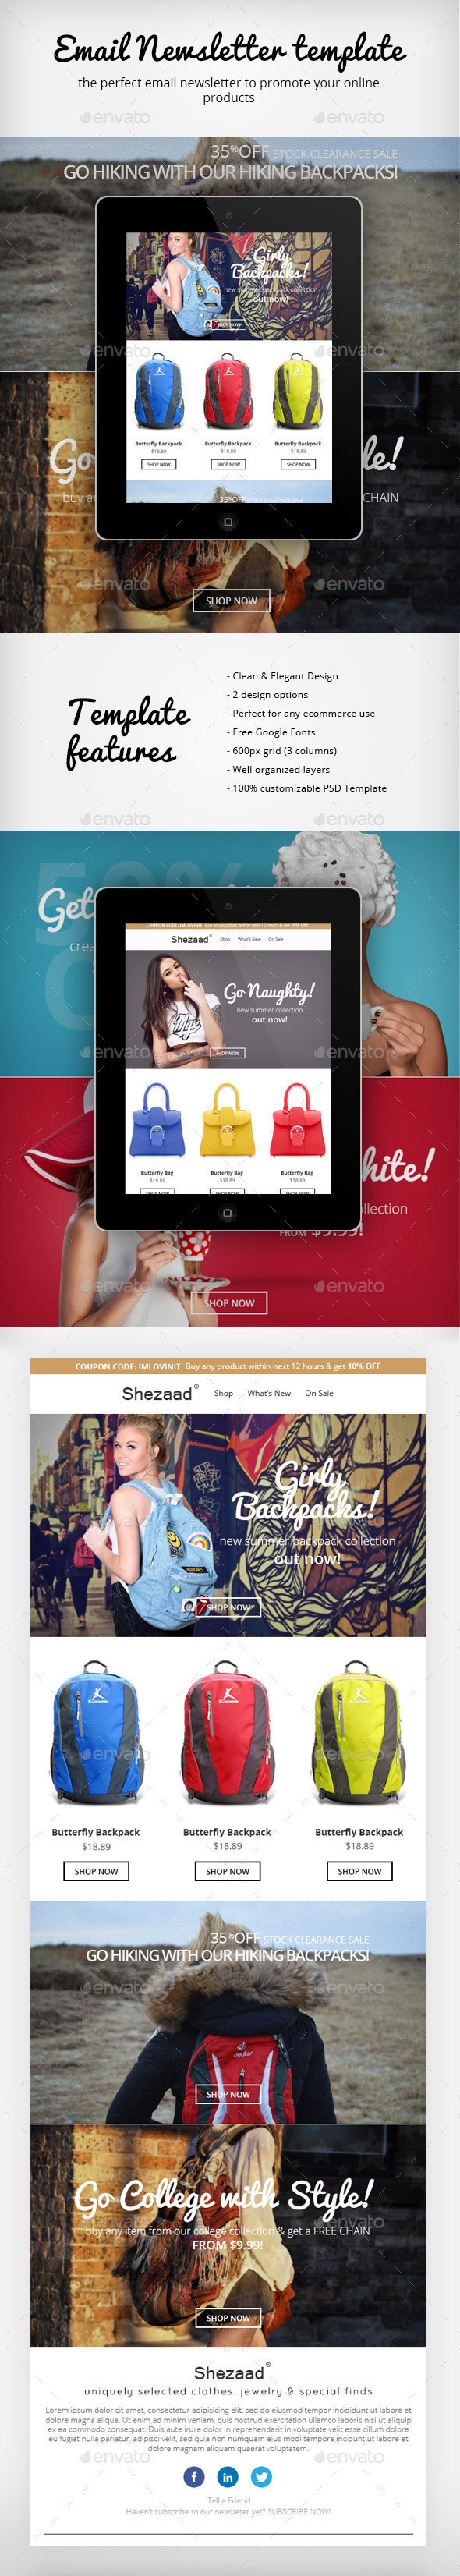 Email newsletter template preview